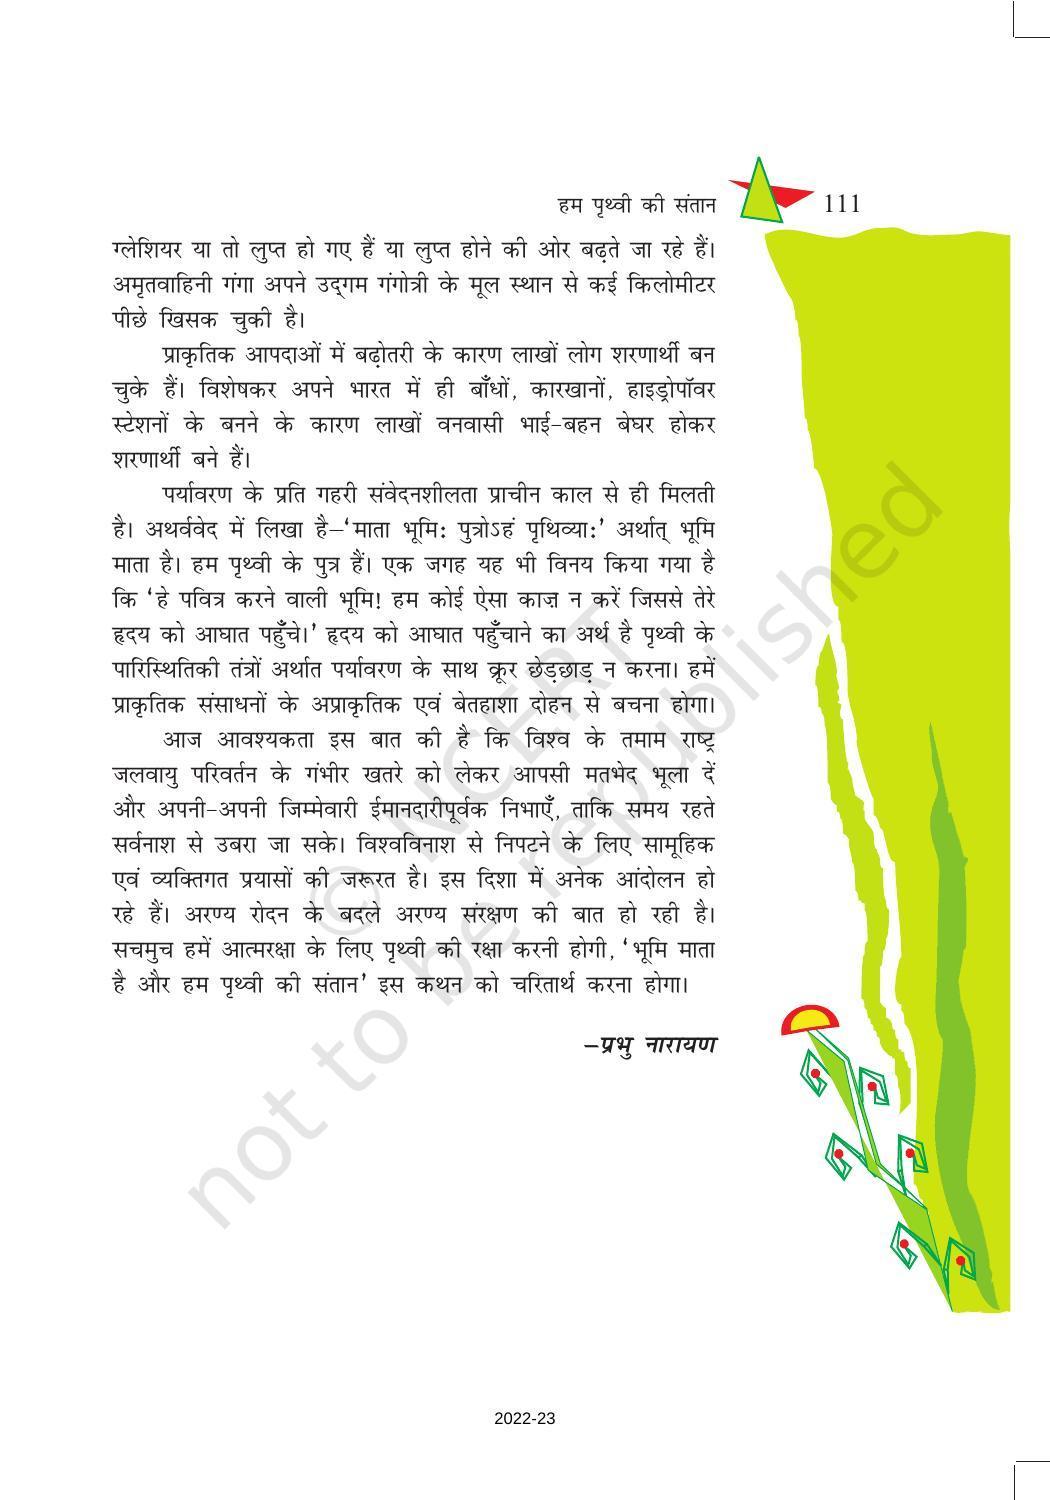 NCERT Book for Class 8 Hindi Vasant Chapter 16 पानी की कहानी - Page 14